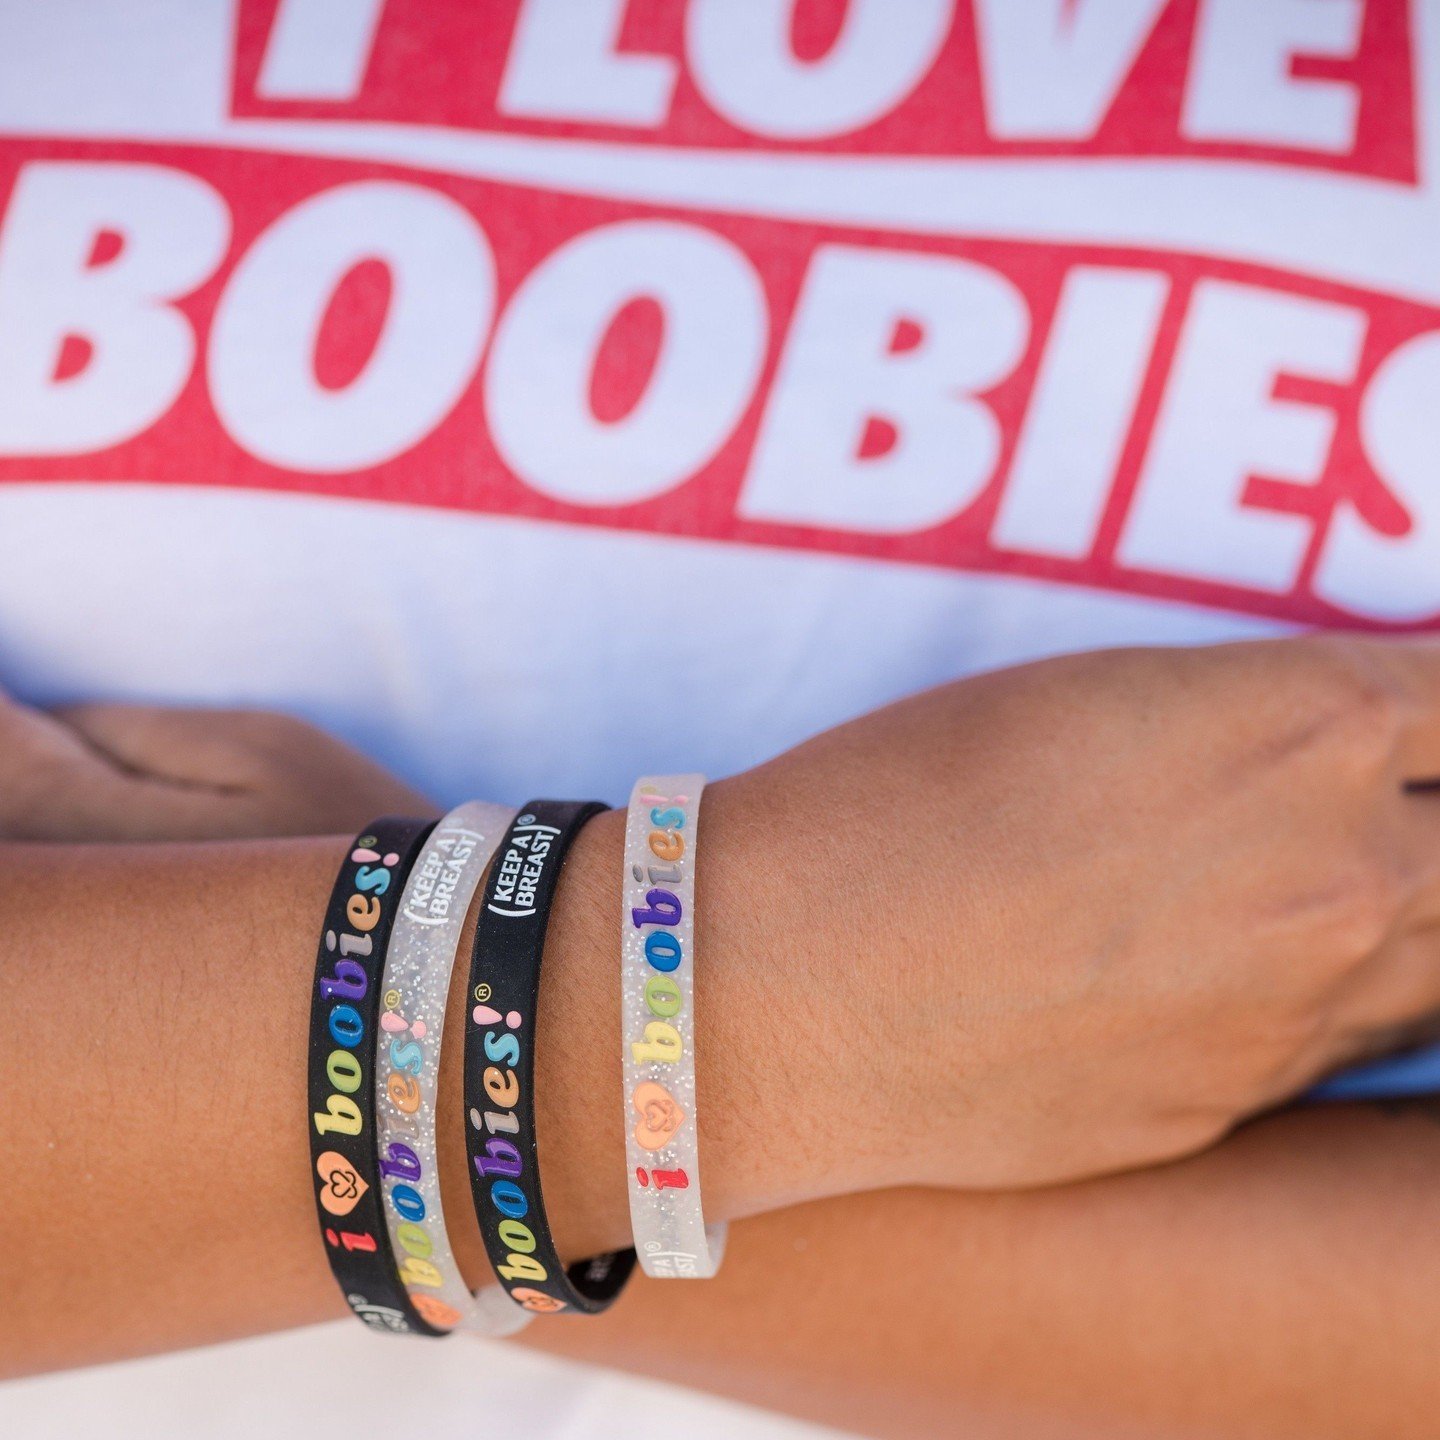 Celebrate #PrideMonth with @keepabreast! 🥳🦄 🪩⁠
⁠
Our Limited Edition Pride Collection features our iconic bracelets with the Progress Pride Flag colors. We believe that everyone should have the right to fair and nondiscriminatory healthcare. Perio